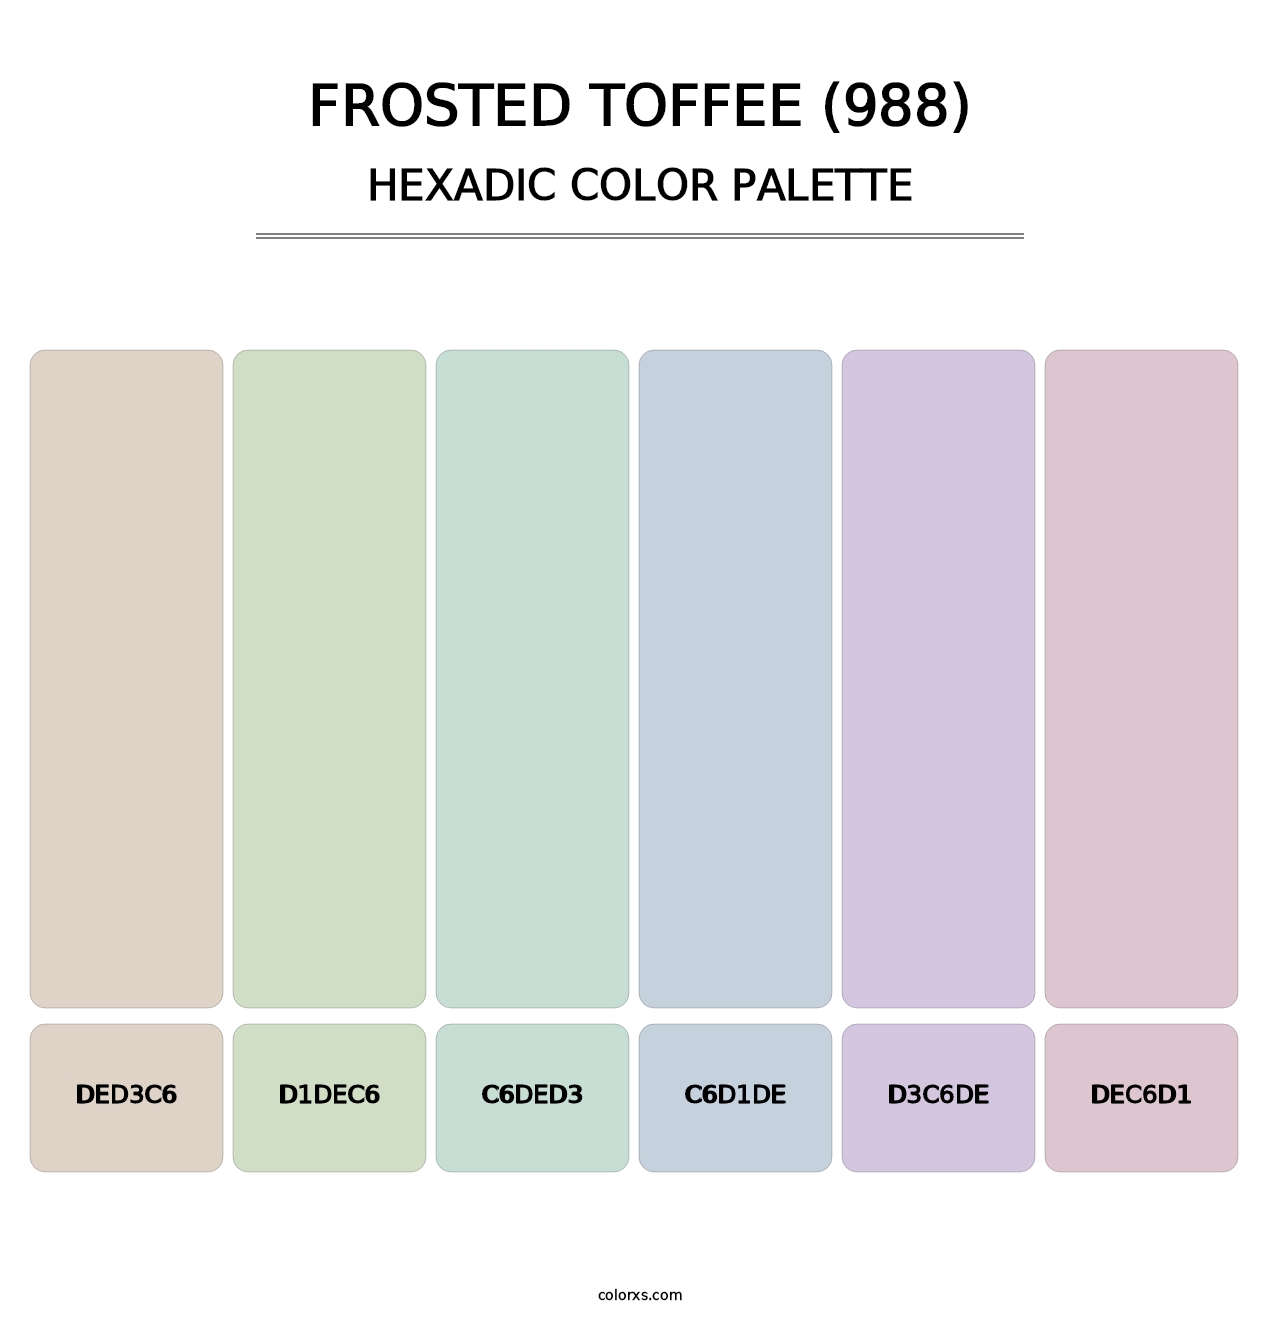 Frosted Toffee (988) - Hexadic Color Palette